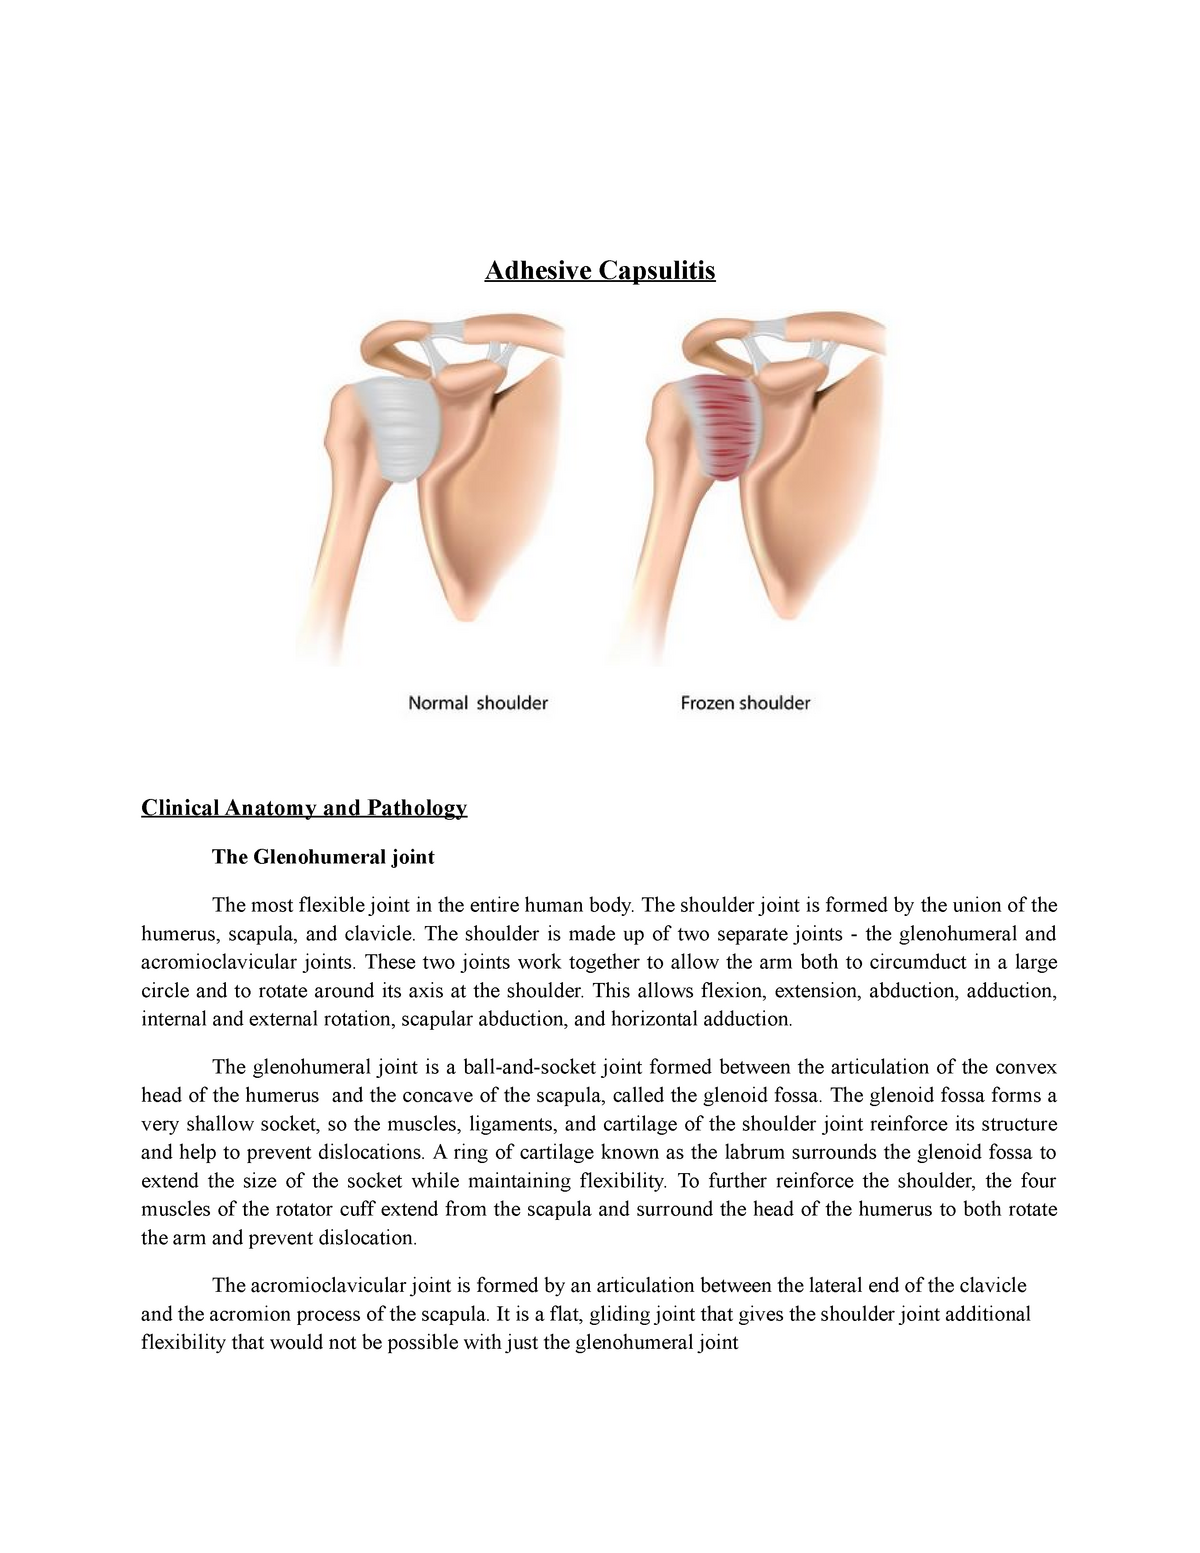 AdhesiveCapsulitis a detailed discussion about adhesive capsulities